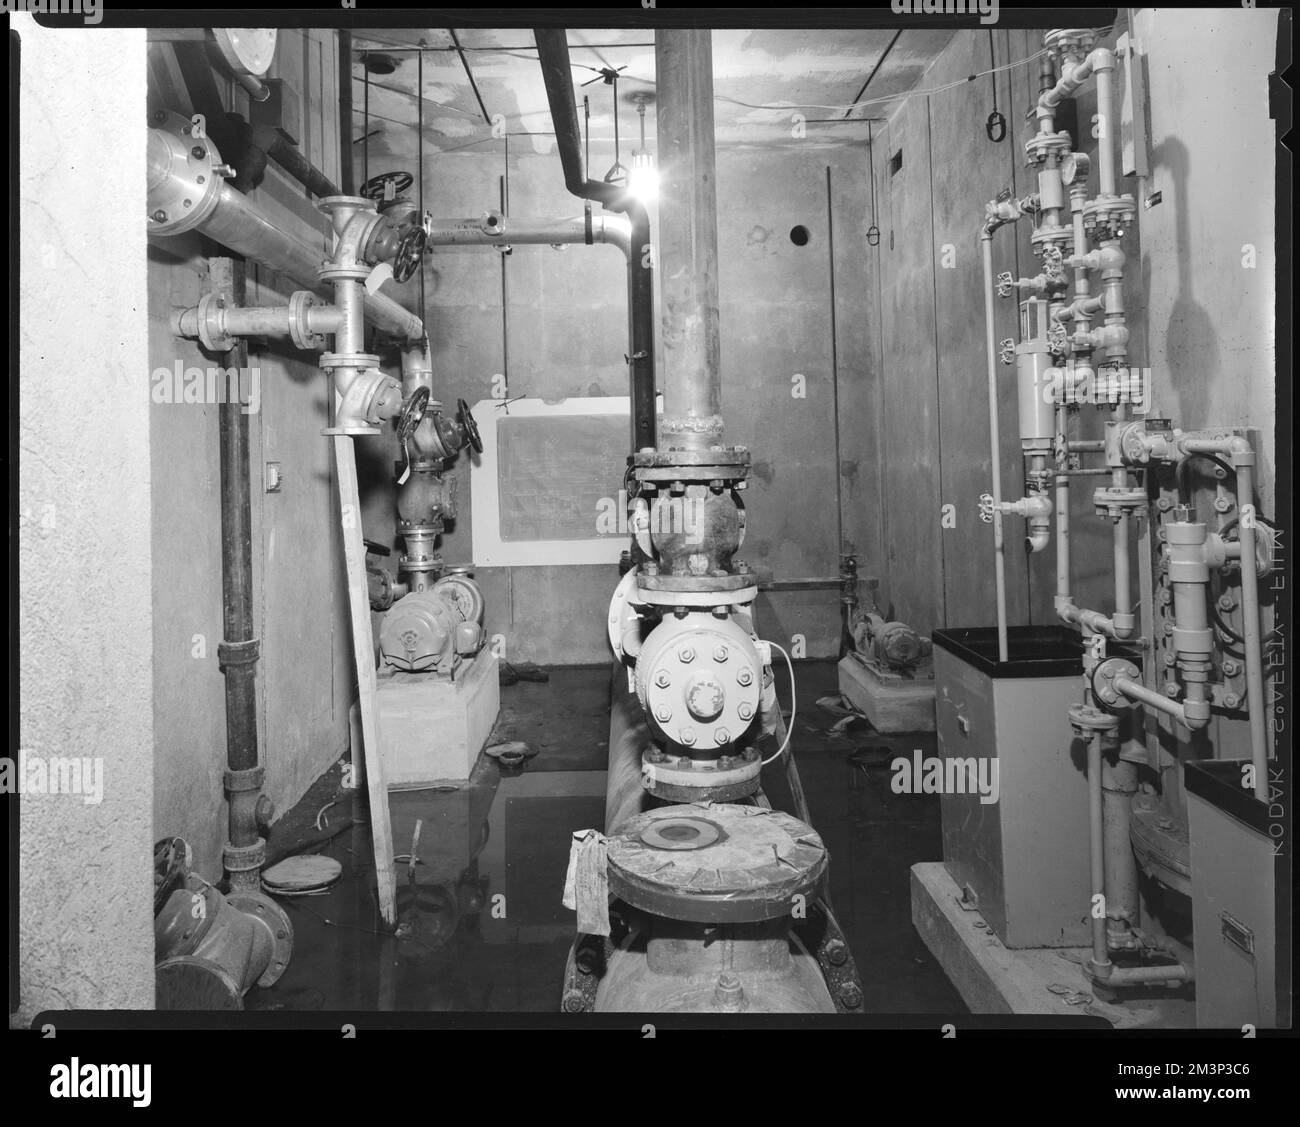 Reactor, coolant room , Armories, Ordnance industry, Nuclear reactors ...